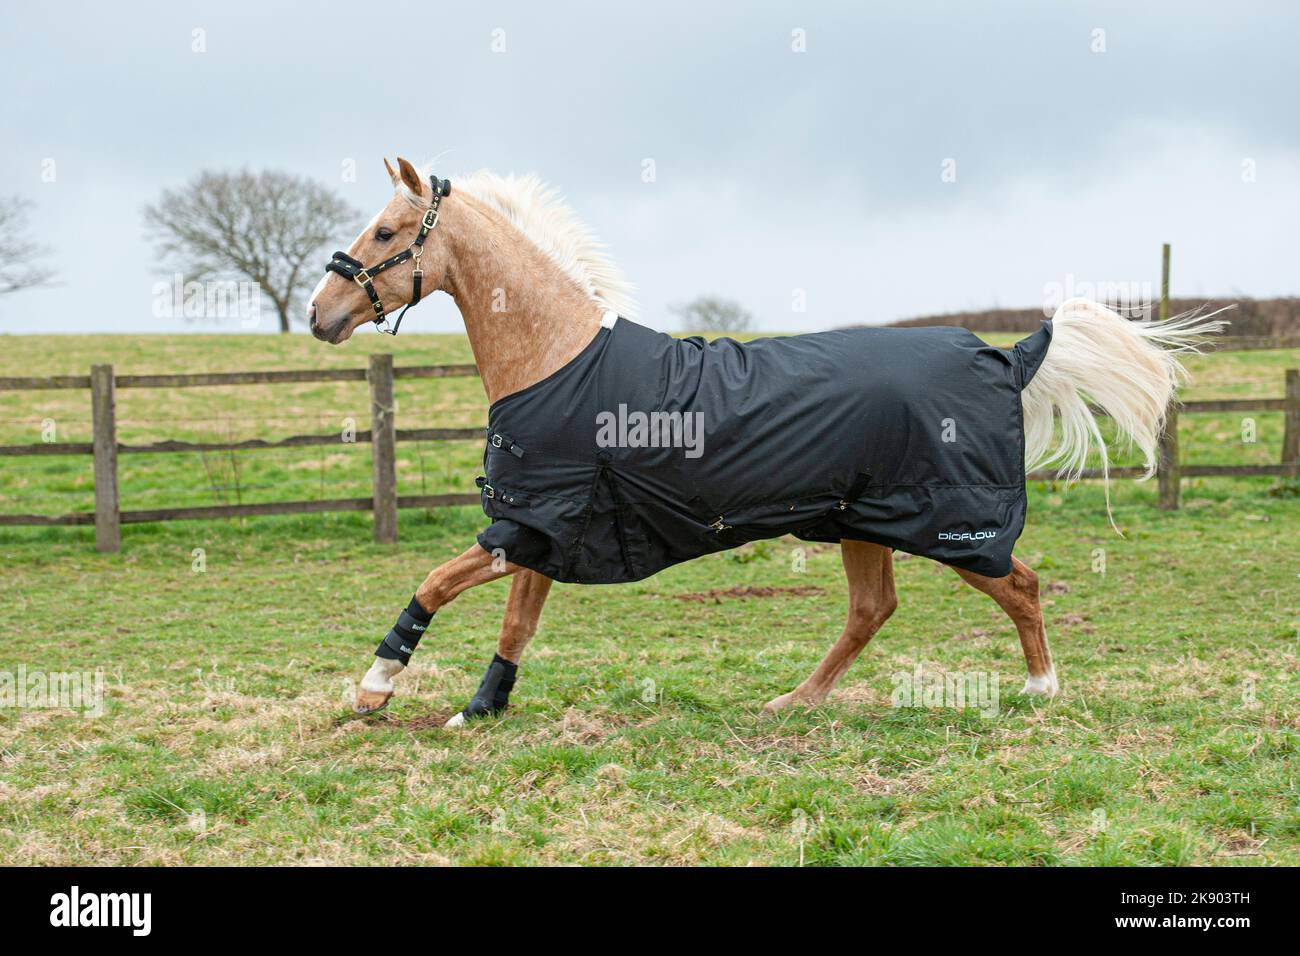 palomino horse wearing a rug in a field Stock Photo